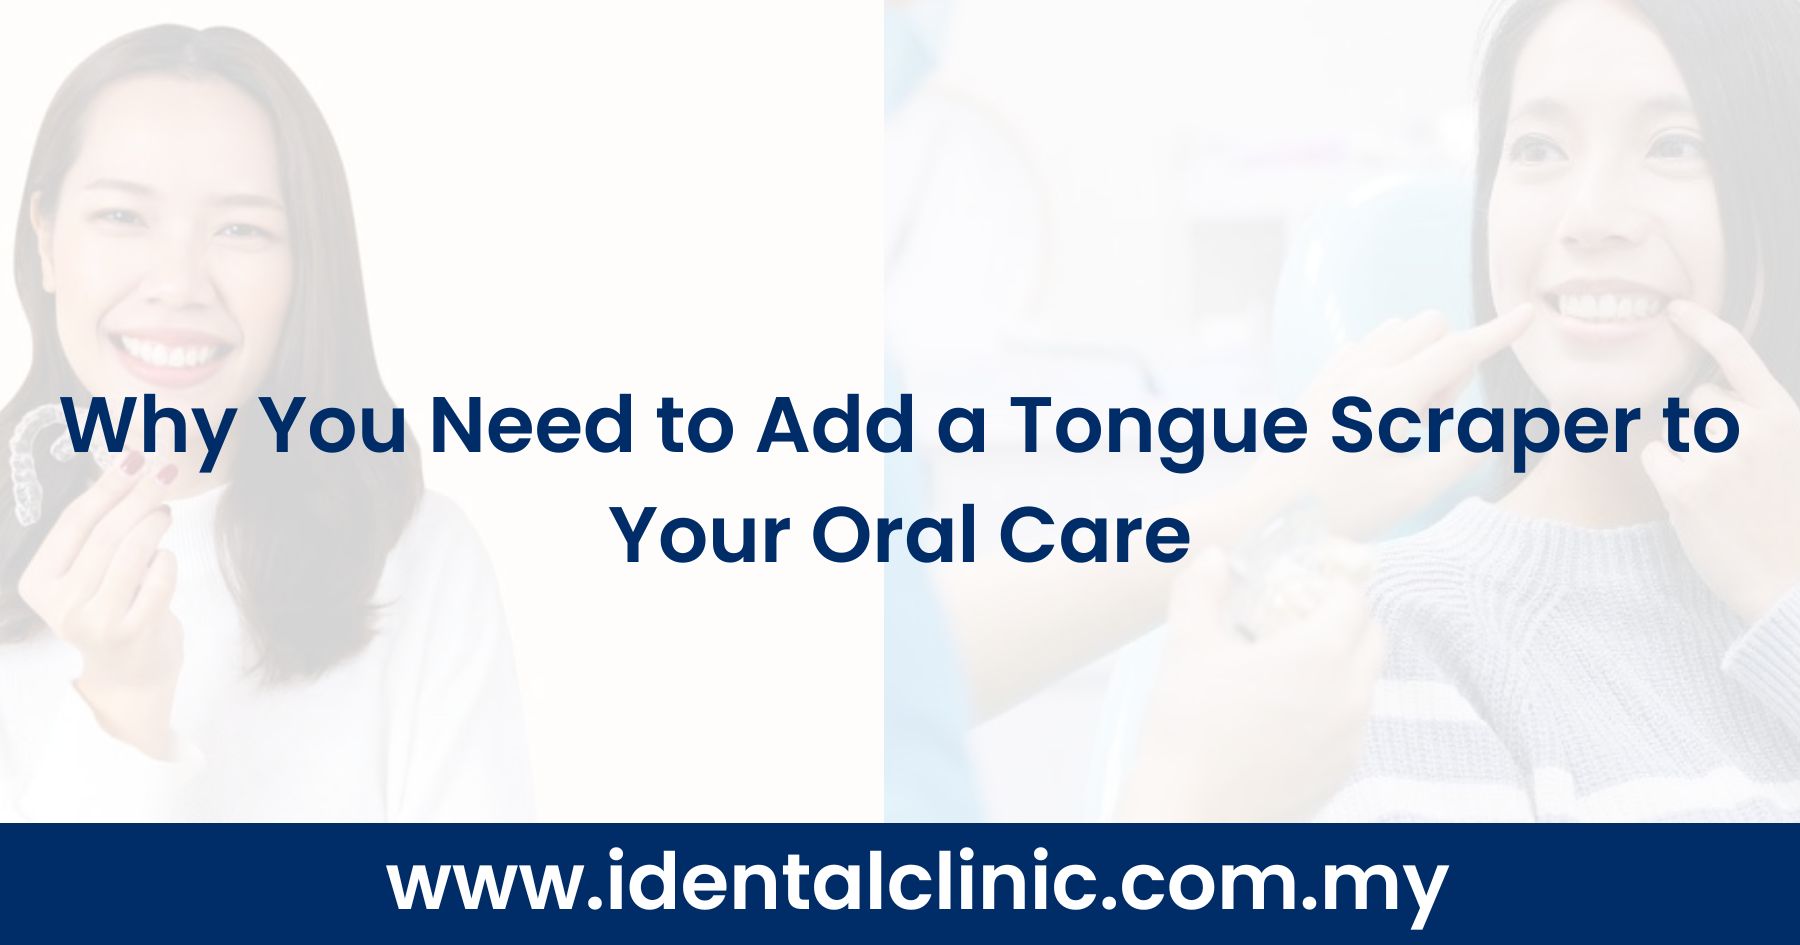 Why You Need to Add a Tongue Scraper to Your Oral Care